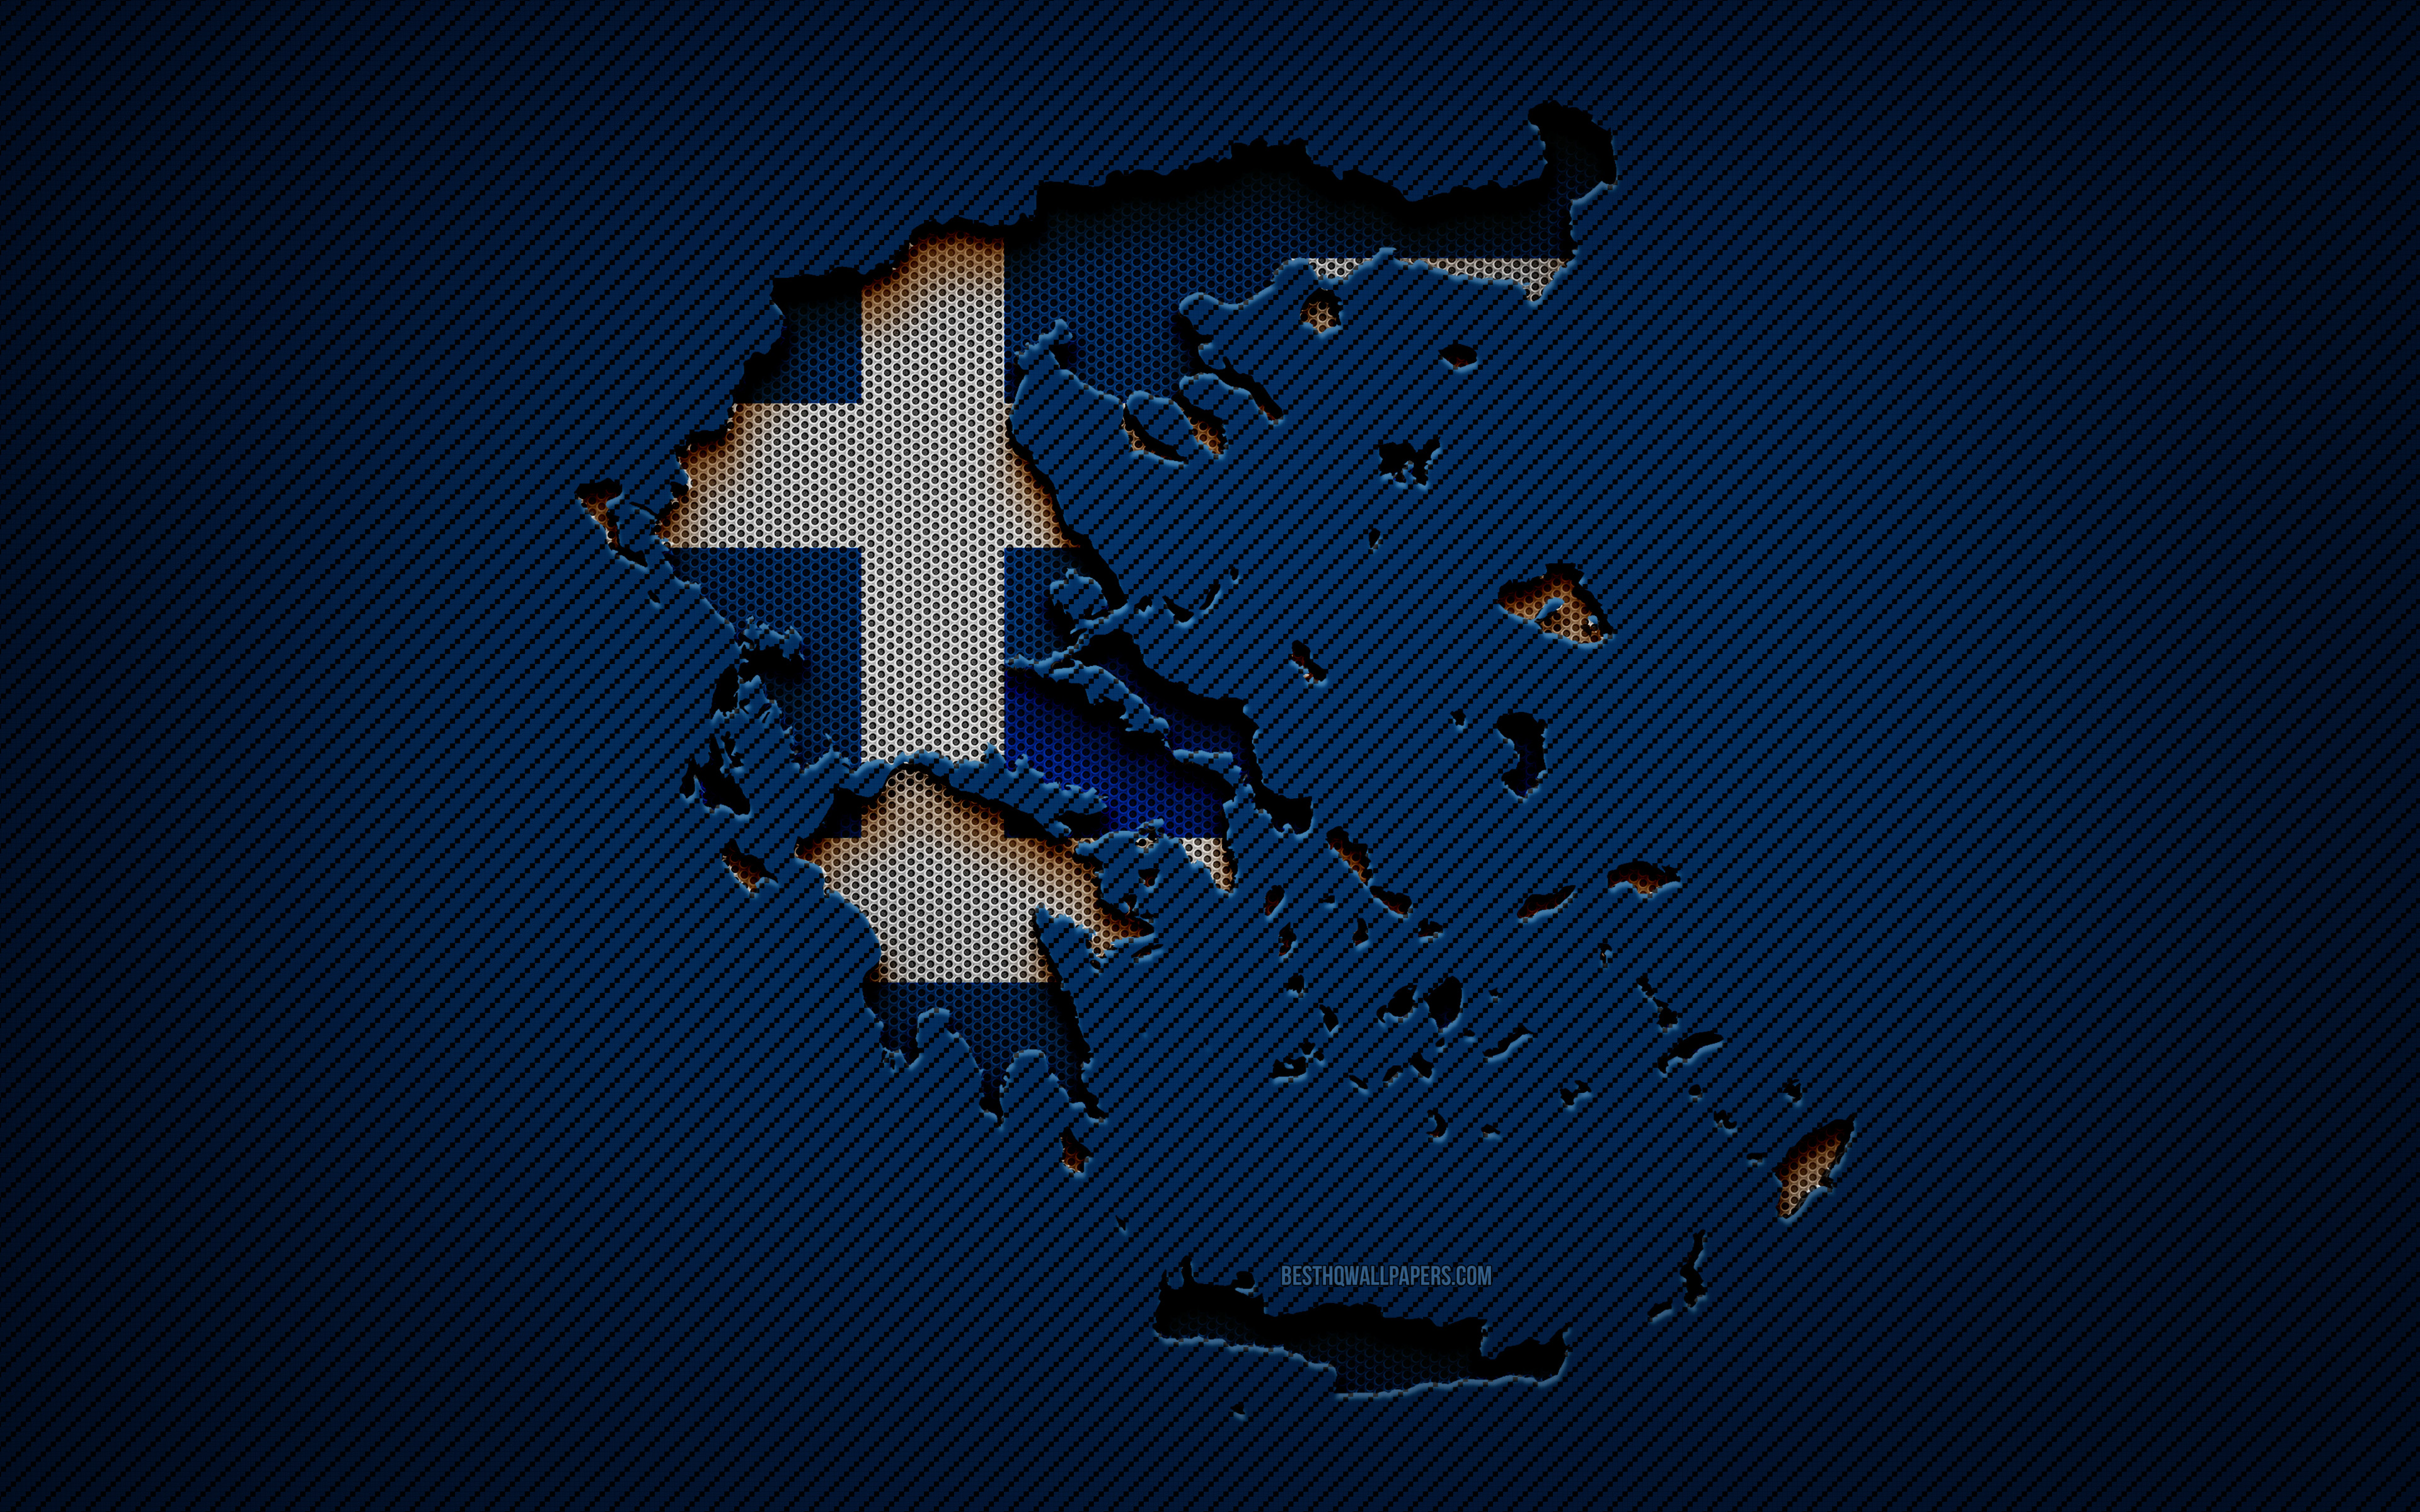 Download wallpaper Greece map, 4k, European countries, Greek flag, blue carbon background, Greece map silhouette, Greece flag, Europe, Greek map, Greece, flag of Greece for desktop with resolution 3840x2400. High Quality HD